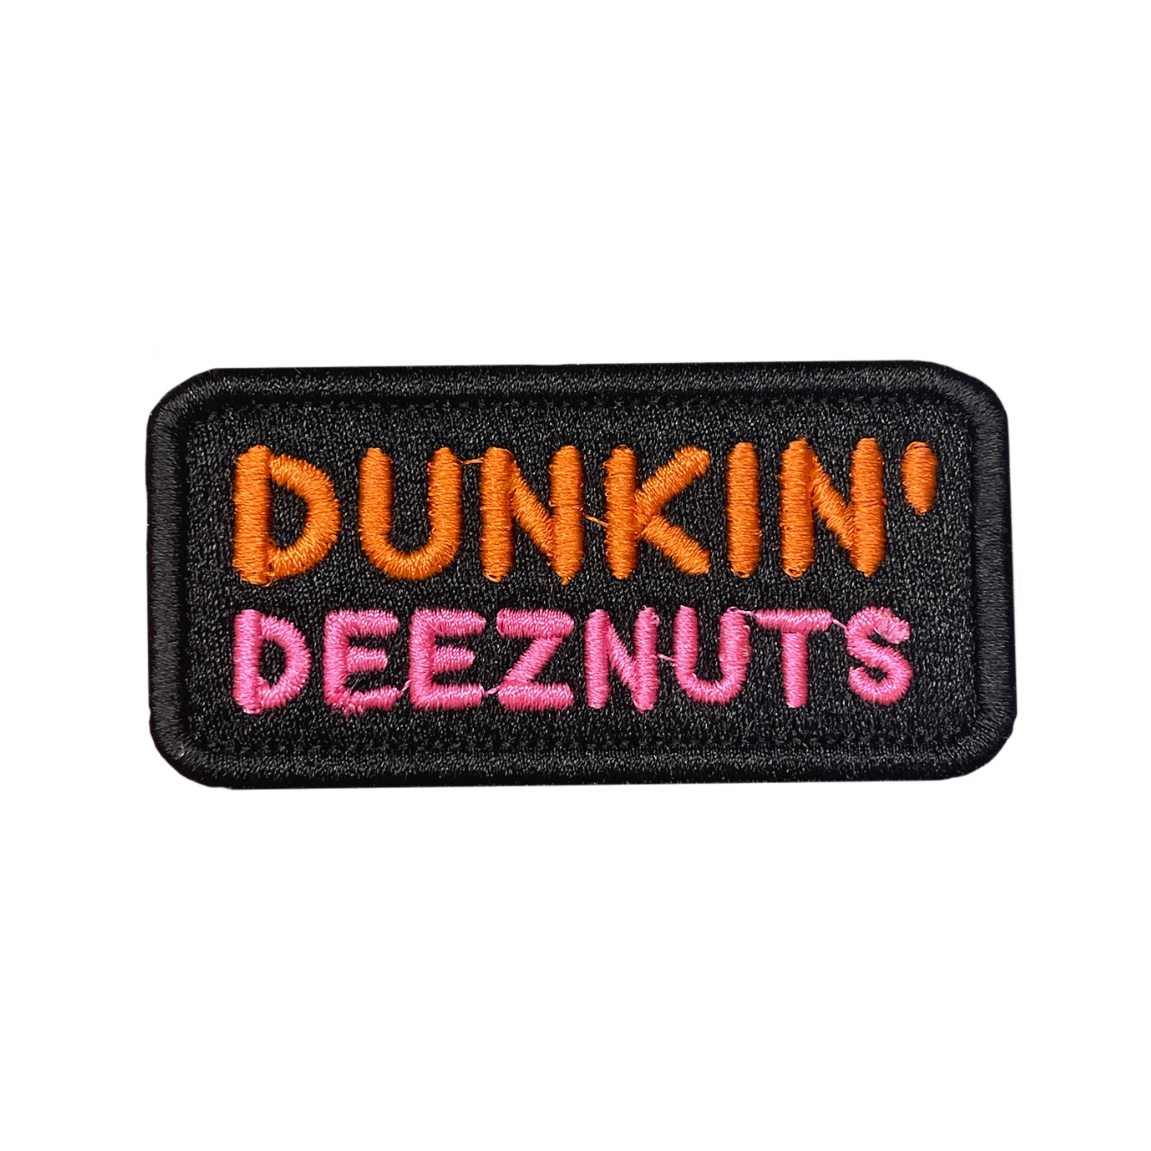 Vibrant 1.5x3 inch Dunkin' Deeznutz Morale Patch with hook and loop back, showcasing humorous design - ideal for backpack customization.